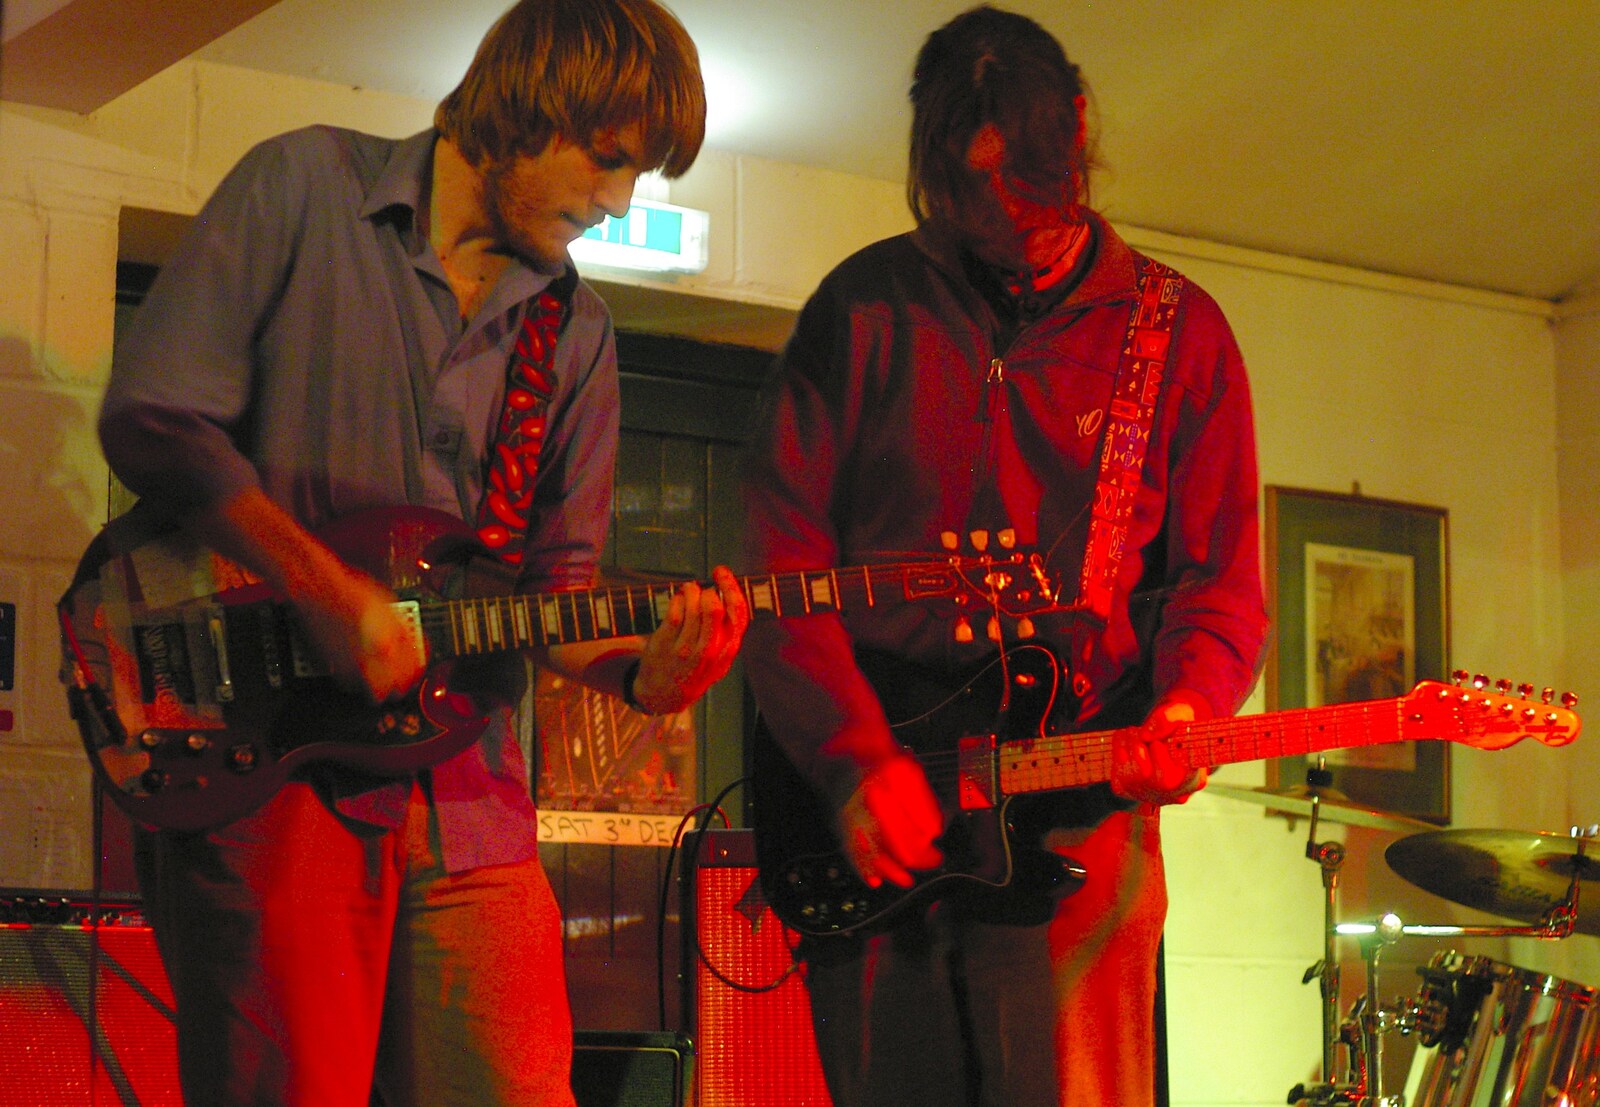 Tom and Paz get in the zone from The Destruction of Padley's, and Alex Hill at the Barrel, Diss and Banham - 12th November 2005